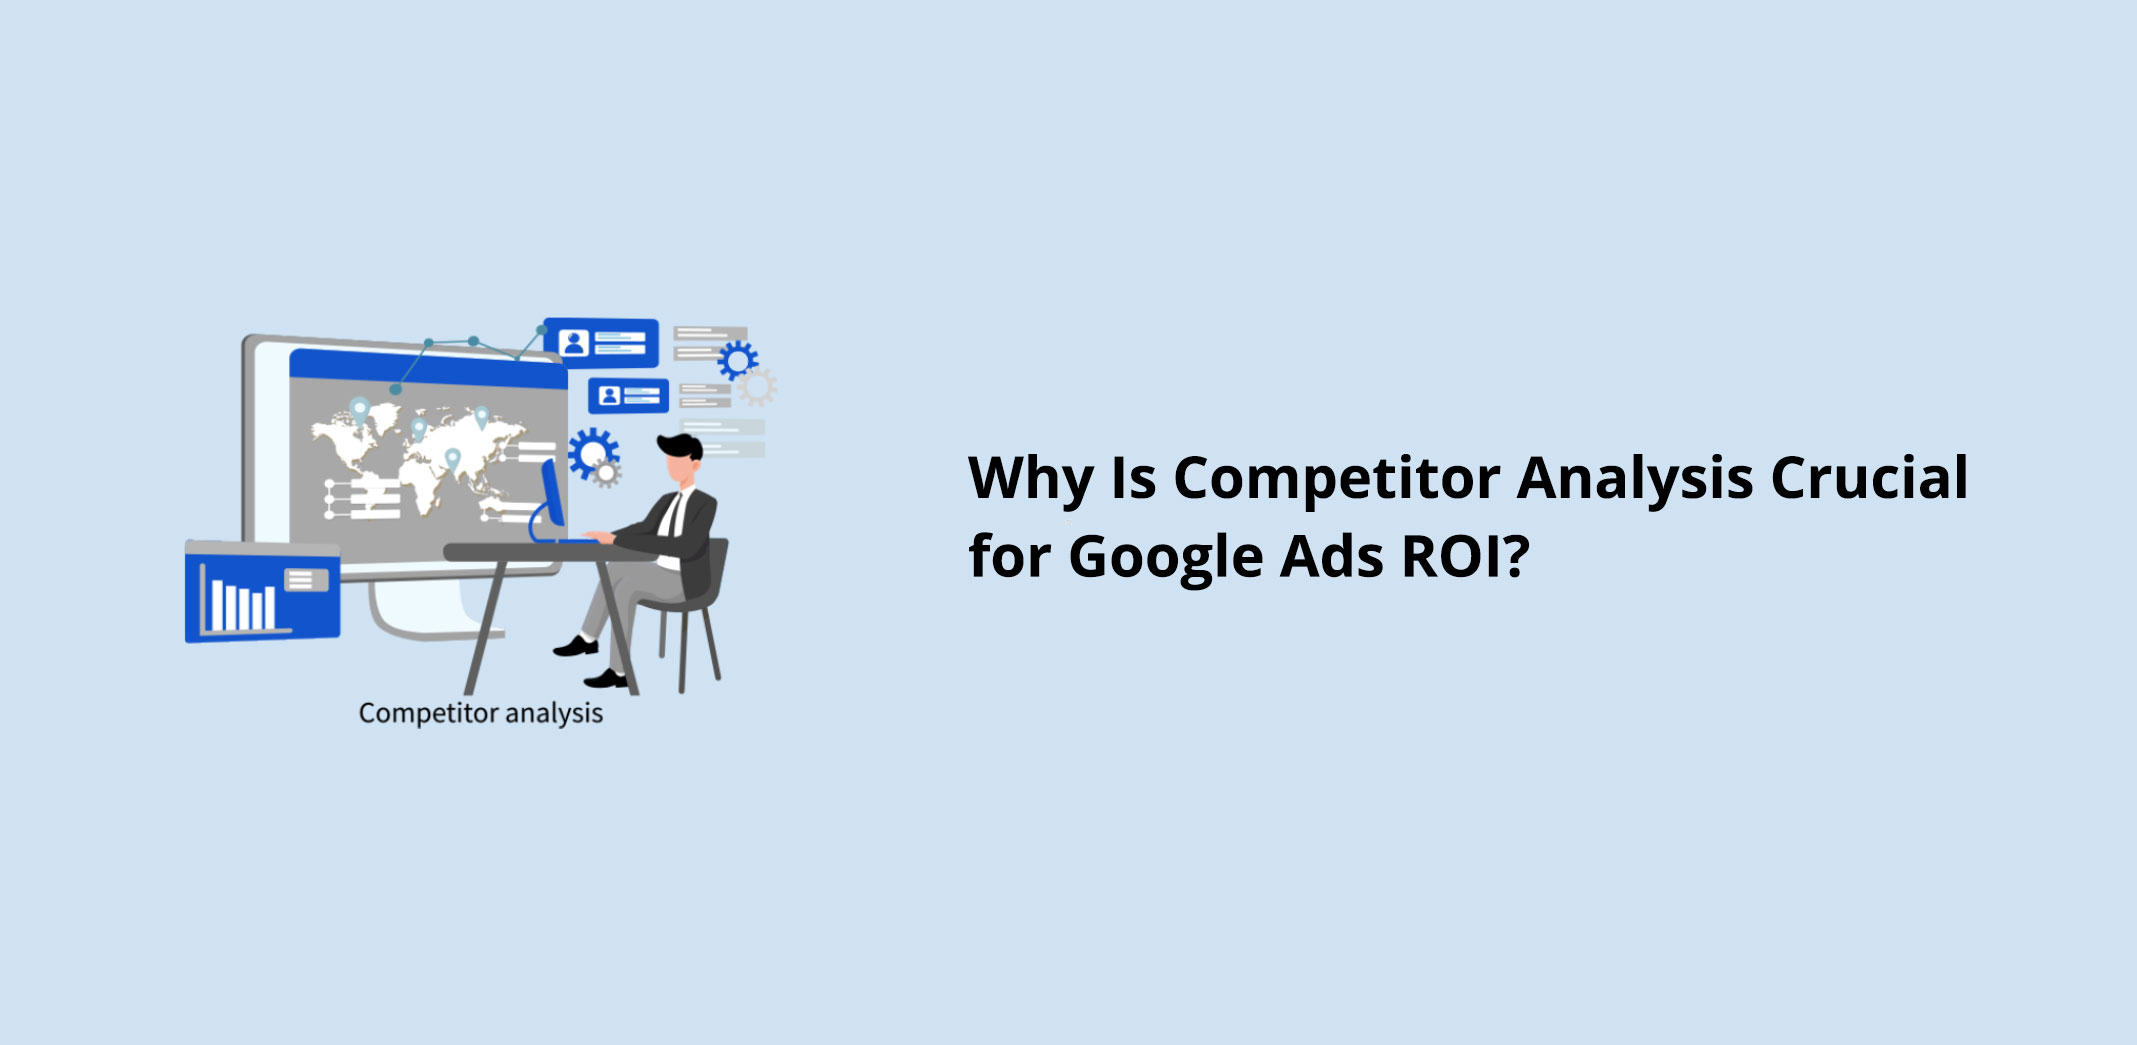 Why Competitive Analysis is Crucial for Google Ads ROI